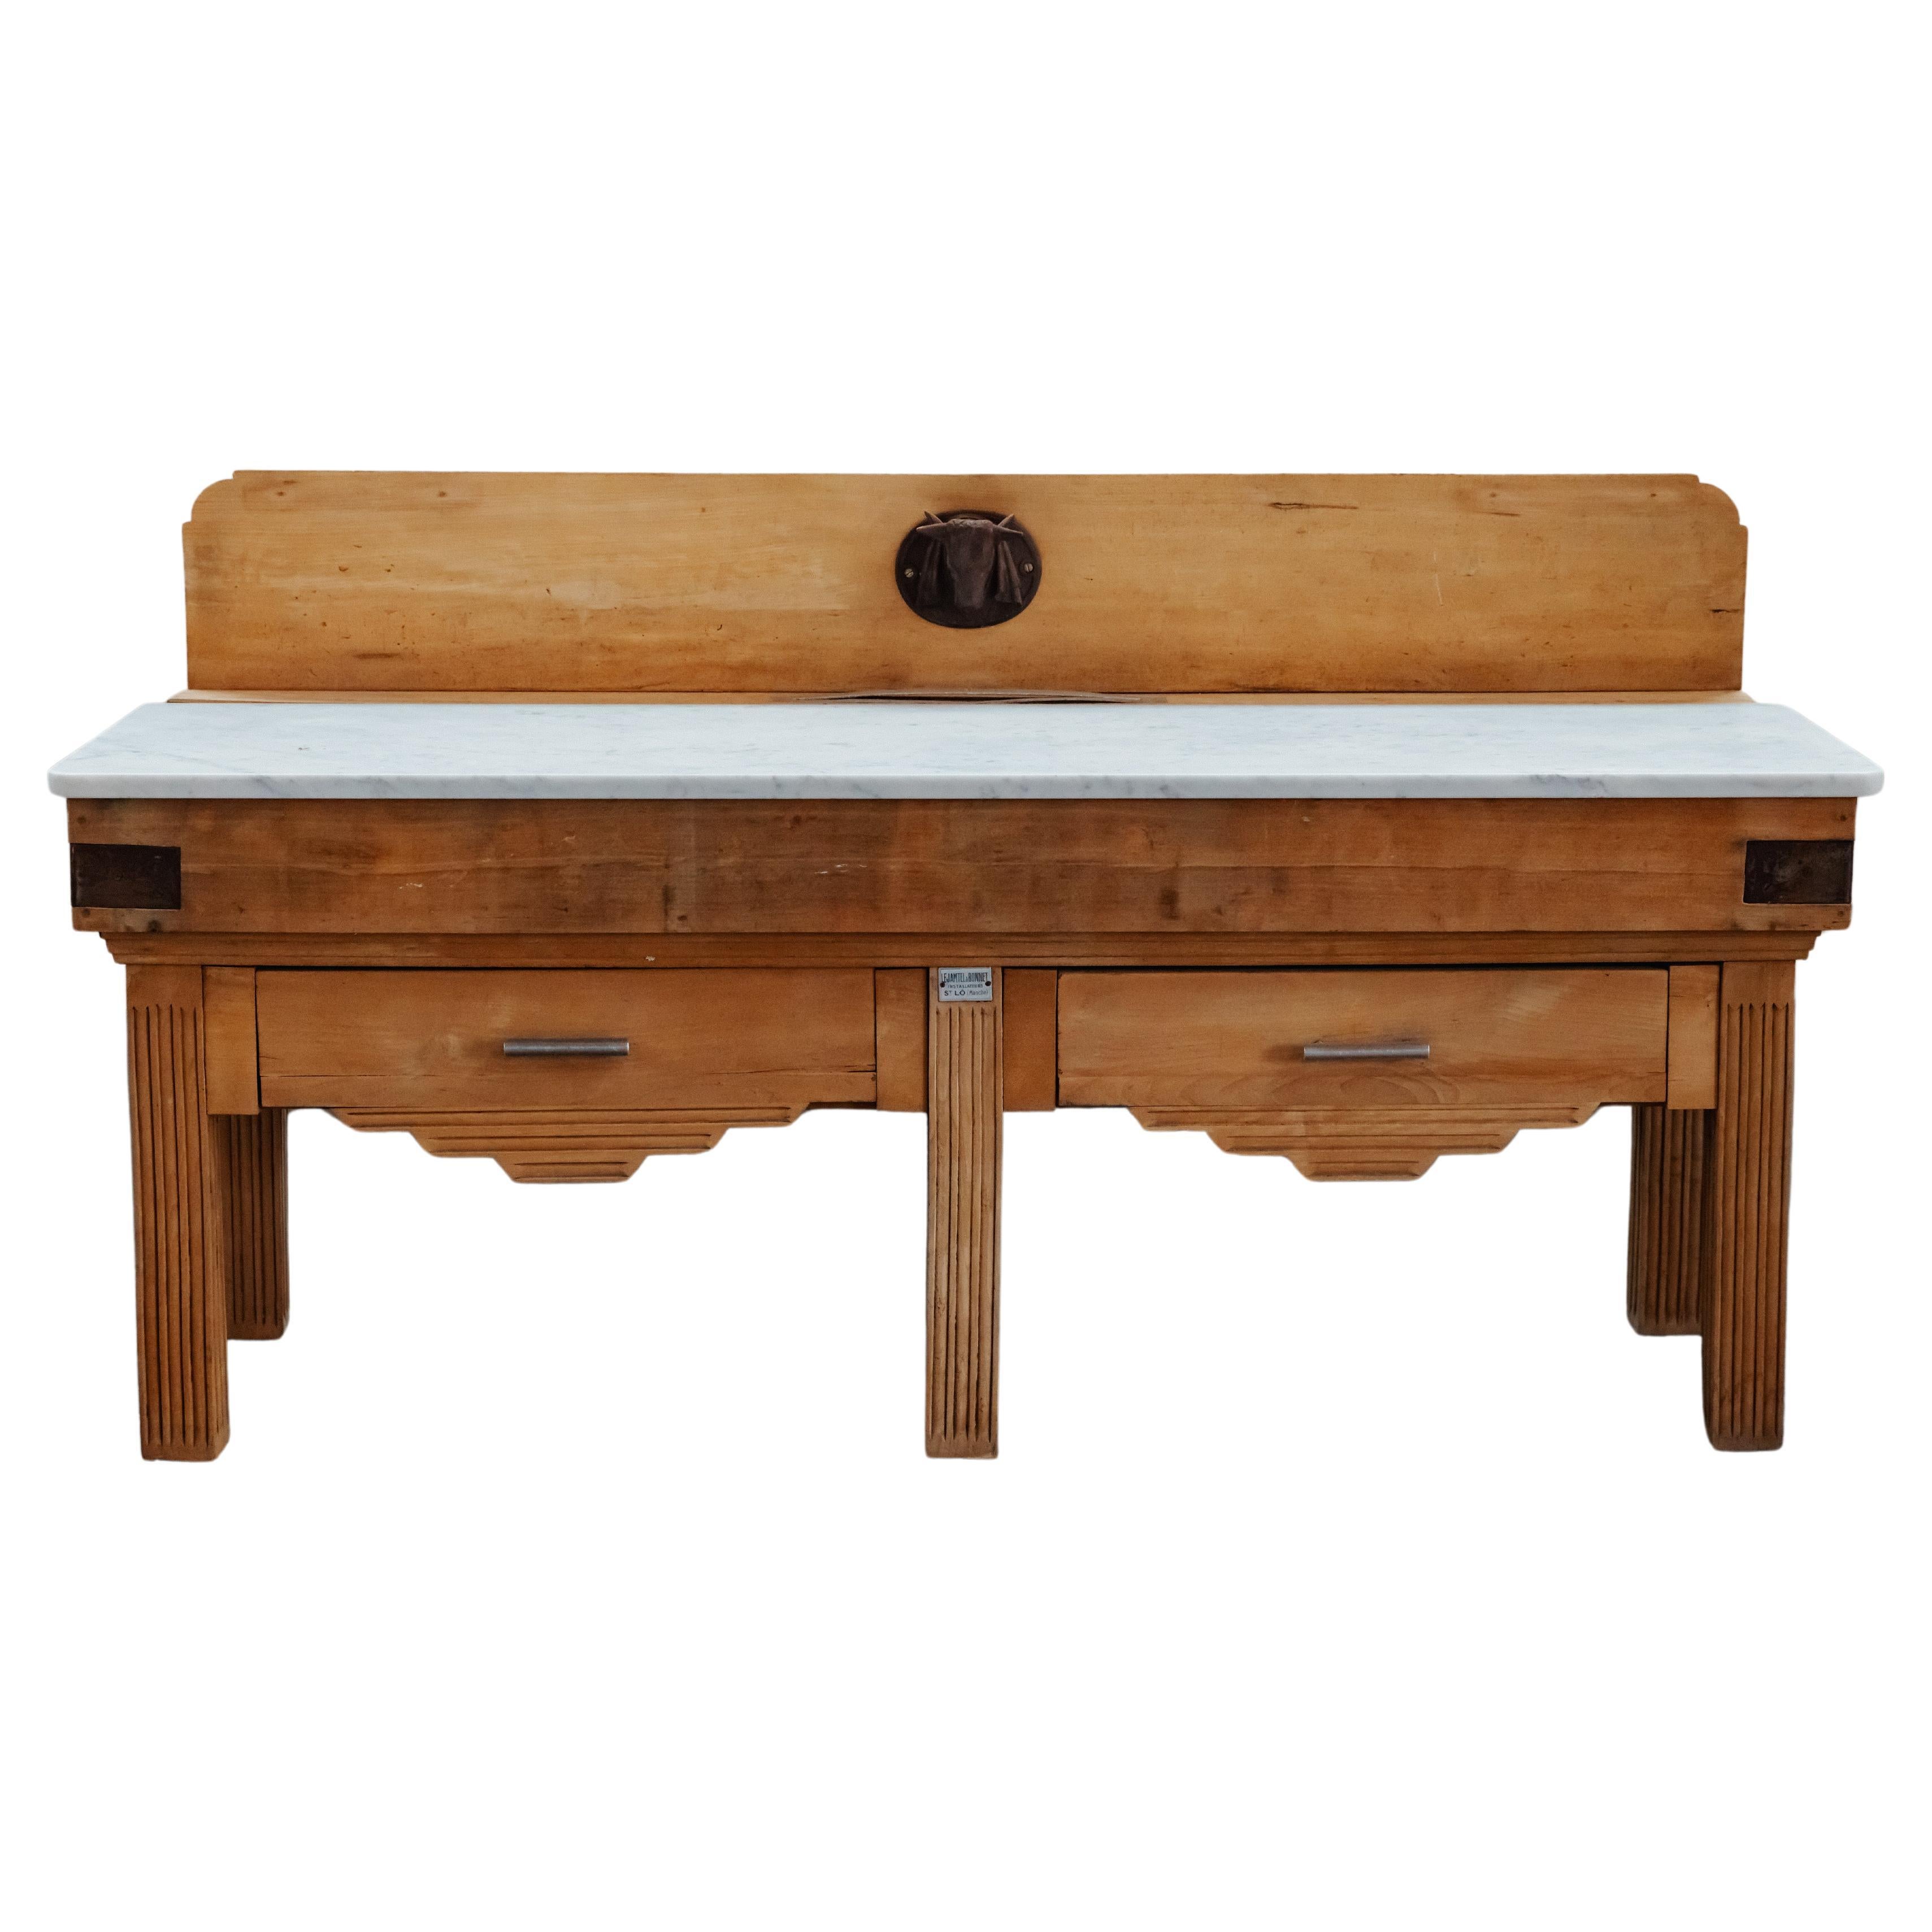 Early Marble Butcher Block Table From France, Circa 1920 For Sale